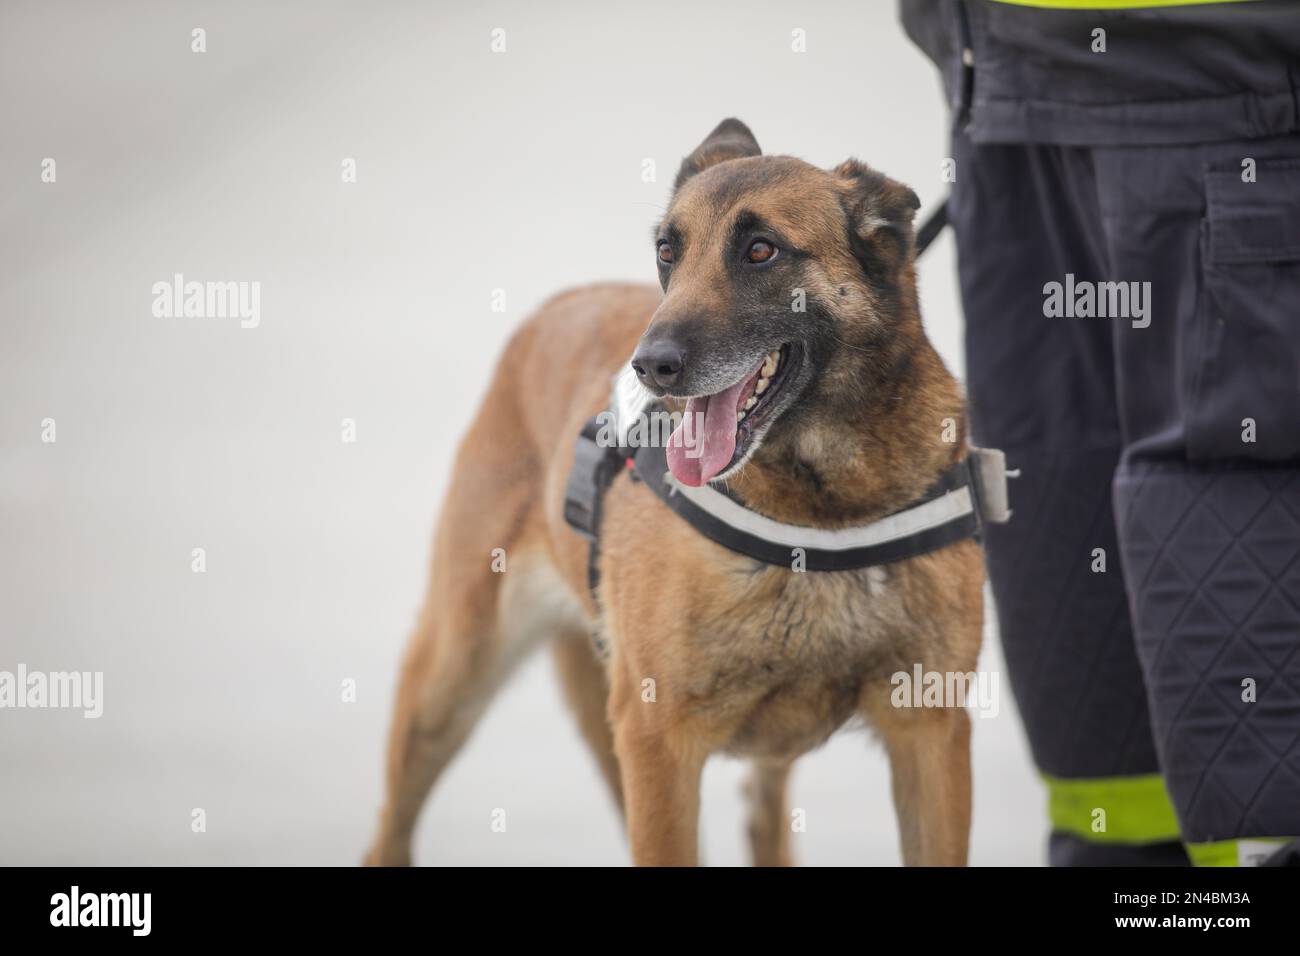 Rescue service dog trained to detect victims of earthquakes and other disasters near his trainer. Stock Photo